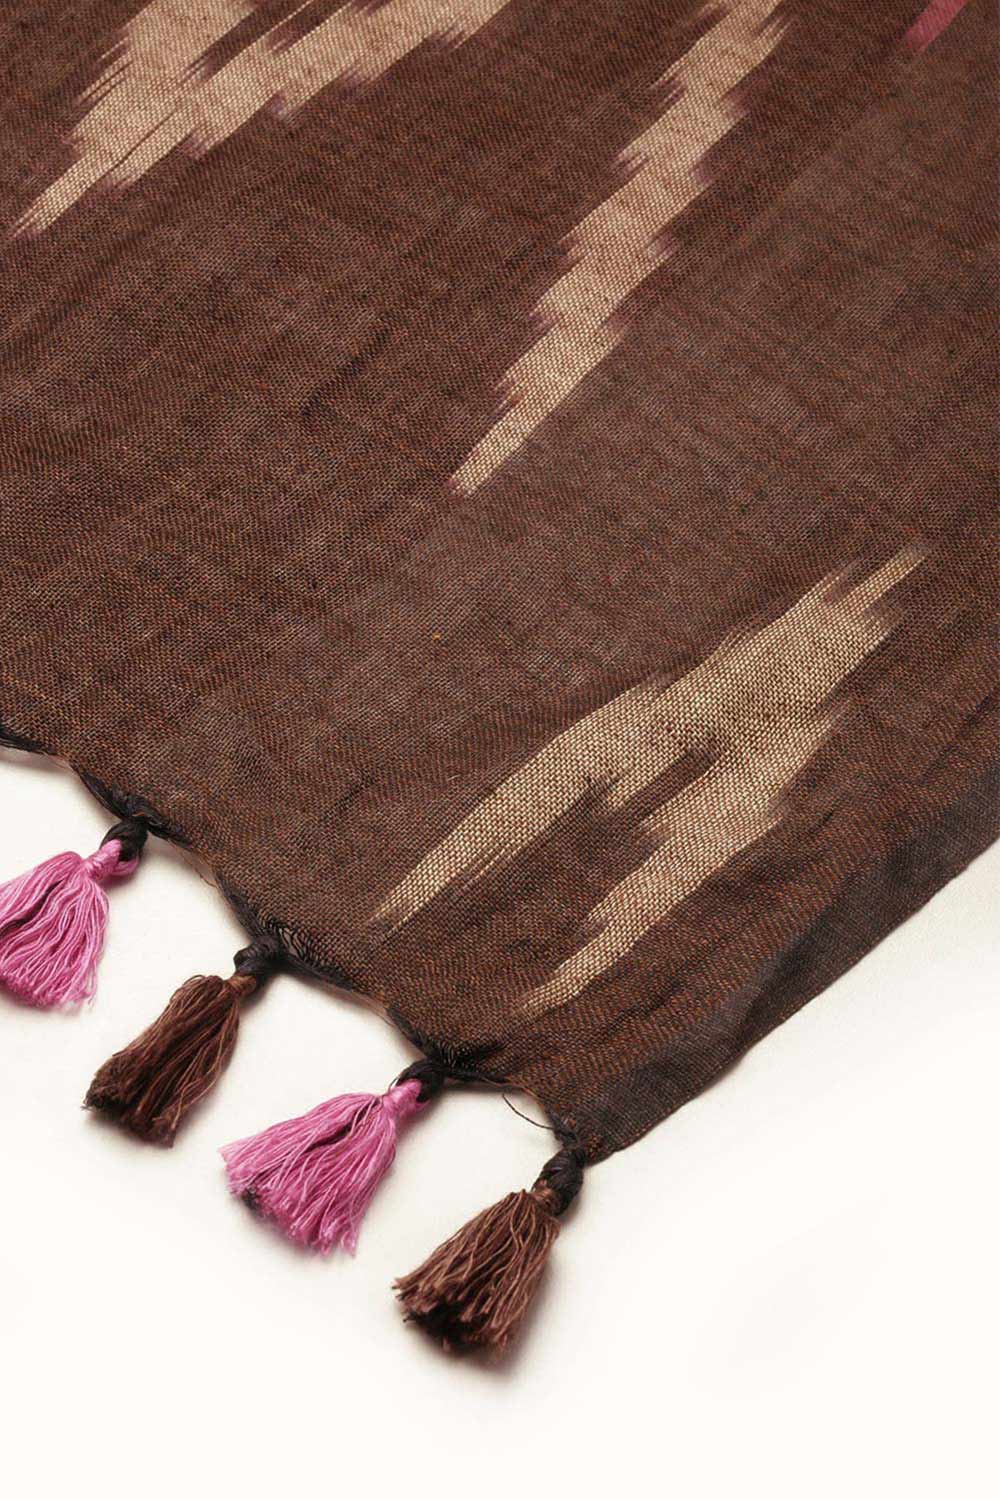 Buy Pure Cotton Ikat Printed Dupatta in Brown Online - Front